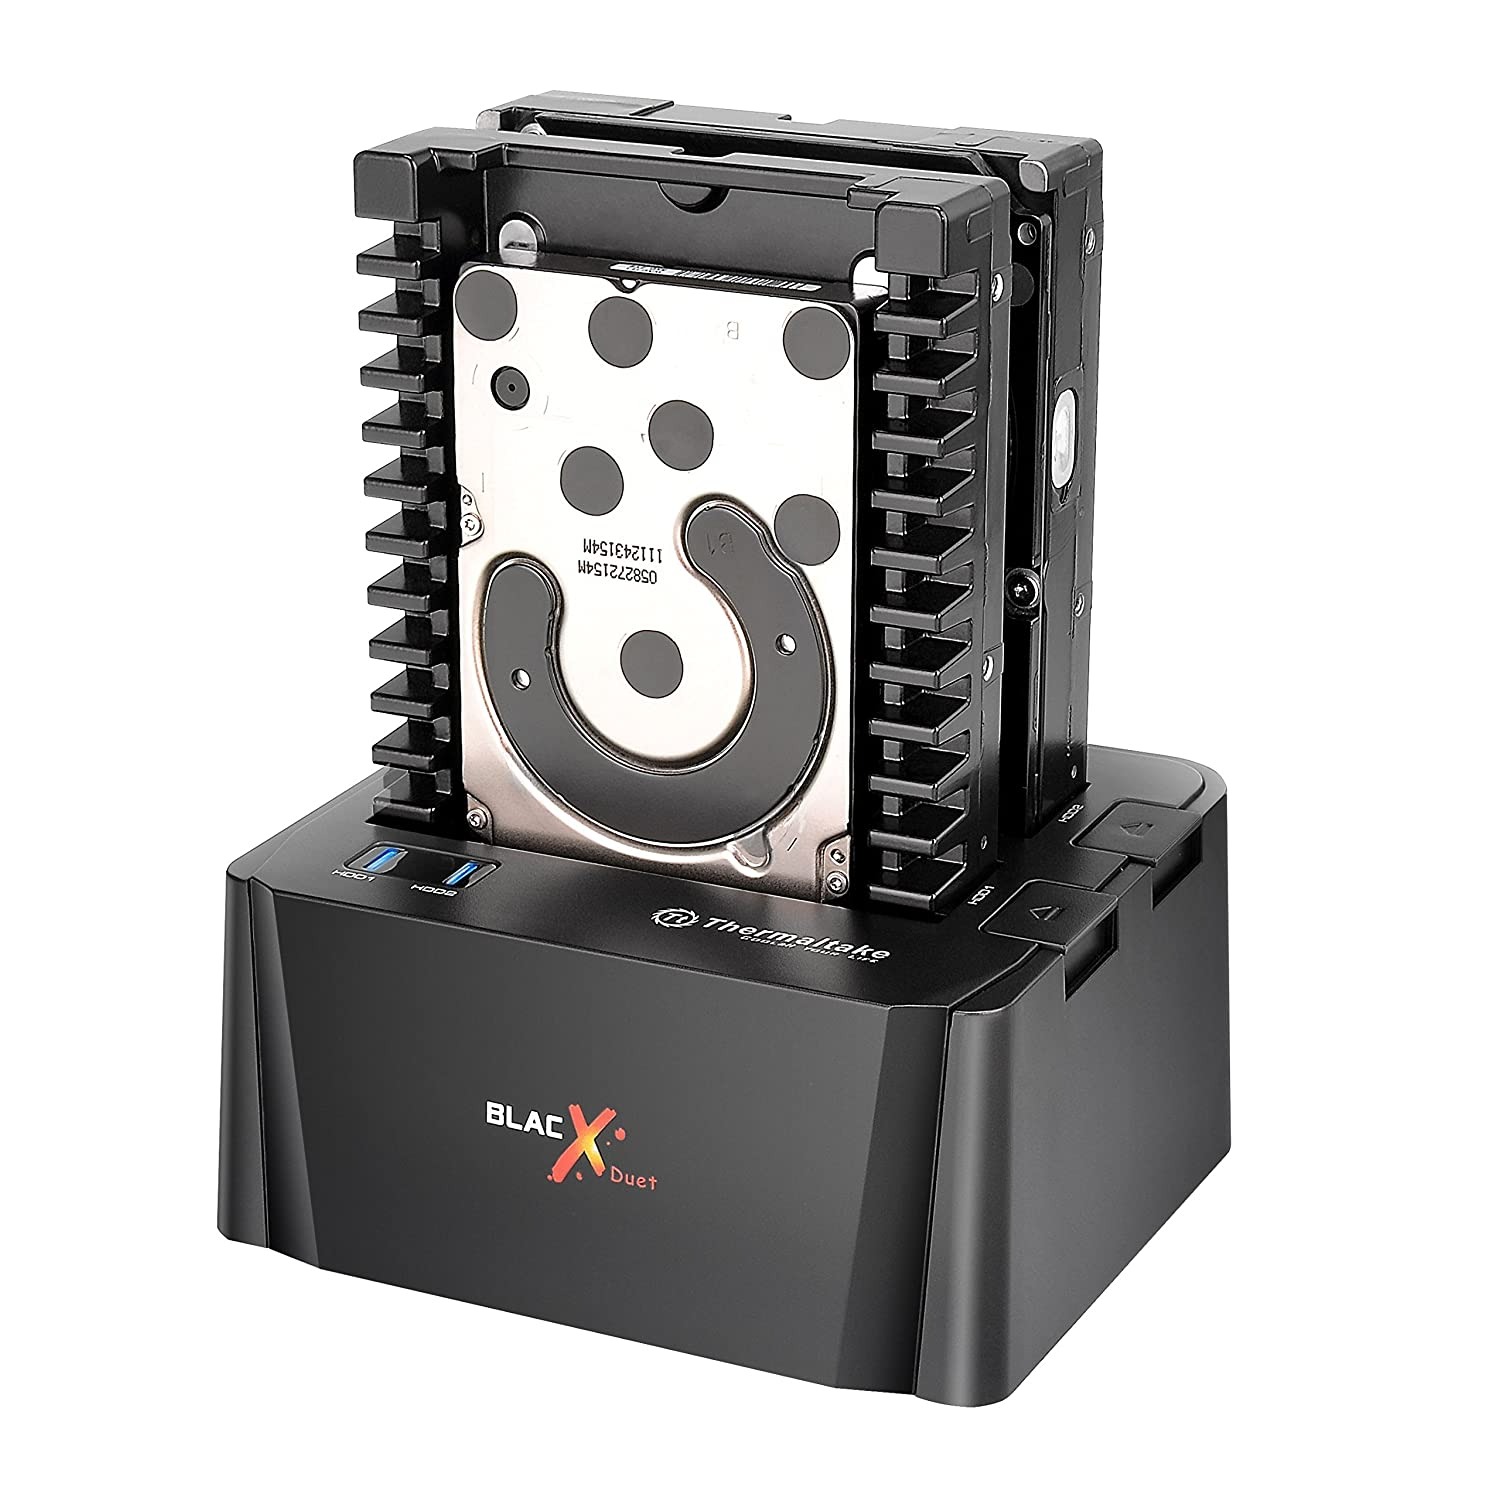 Selecting The Right Power Supply For BlacX ESATA And USB Docking Station